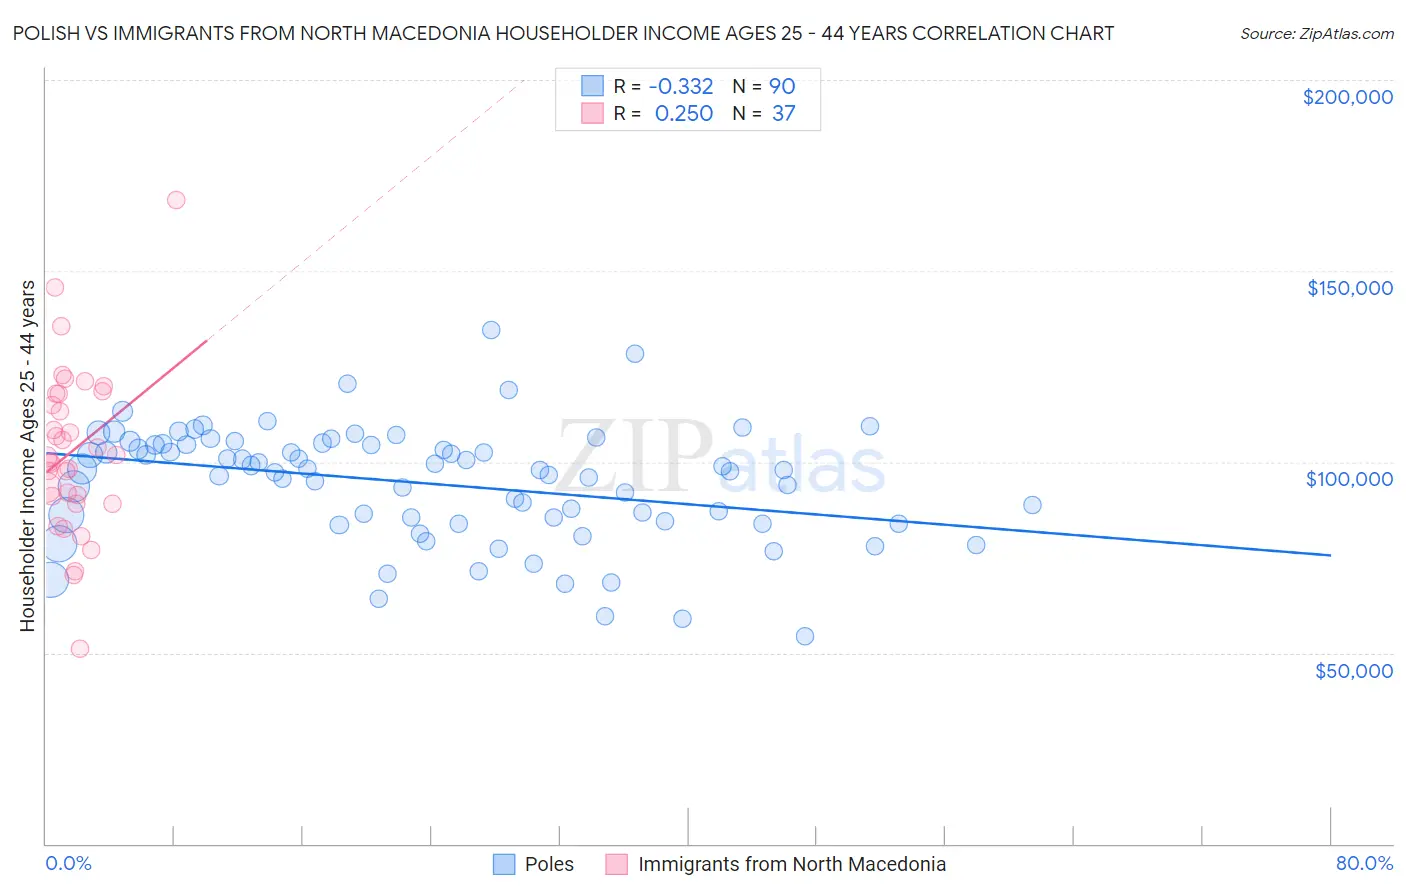 Polish vs Immigrants from North Macedonia Householder Income Ages 25 - 44 years